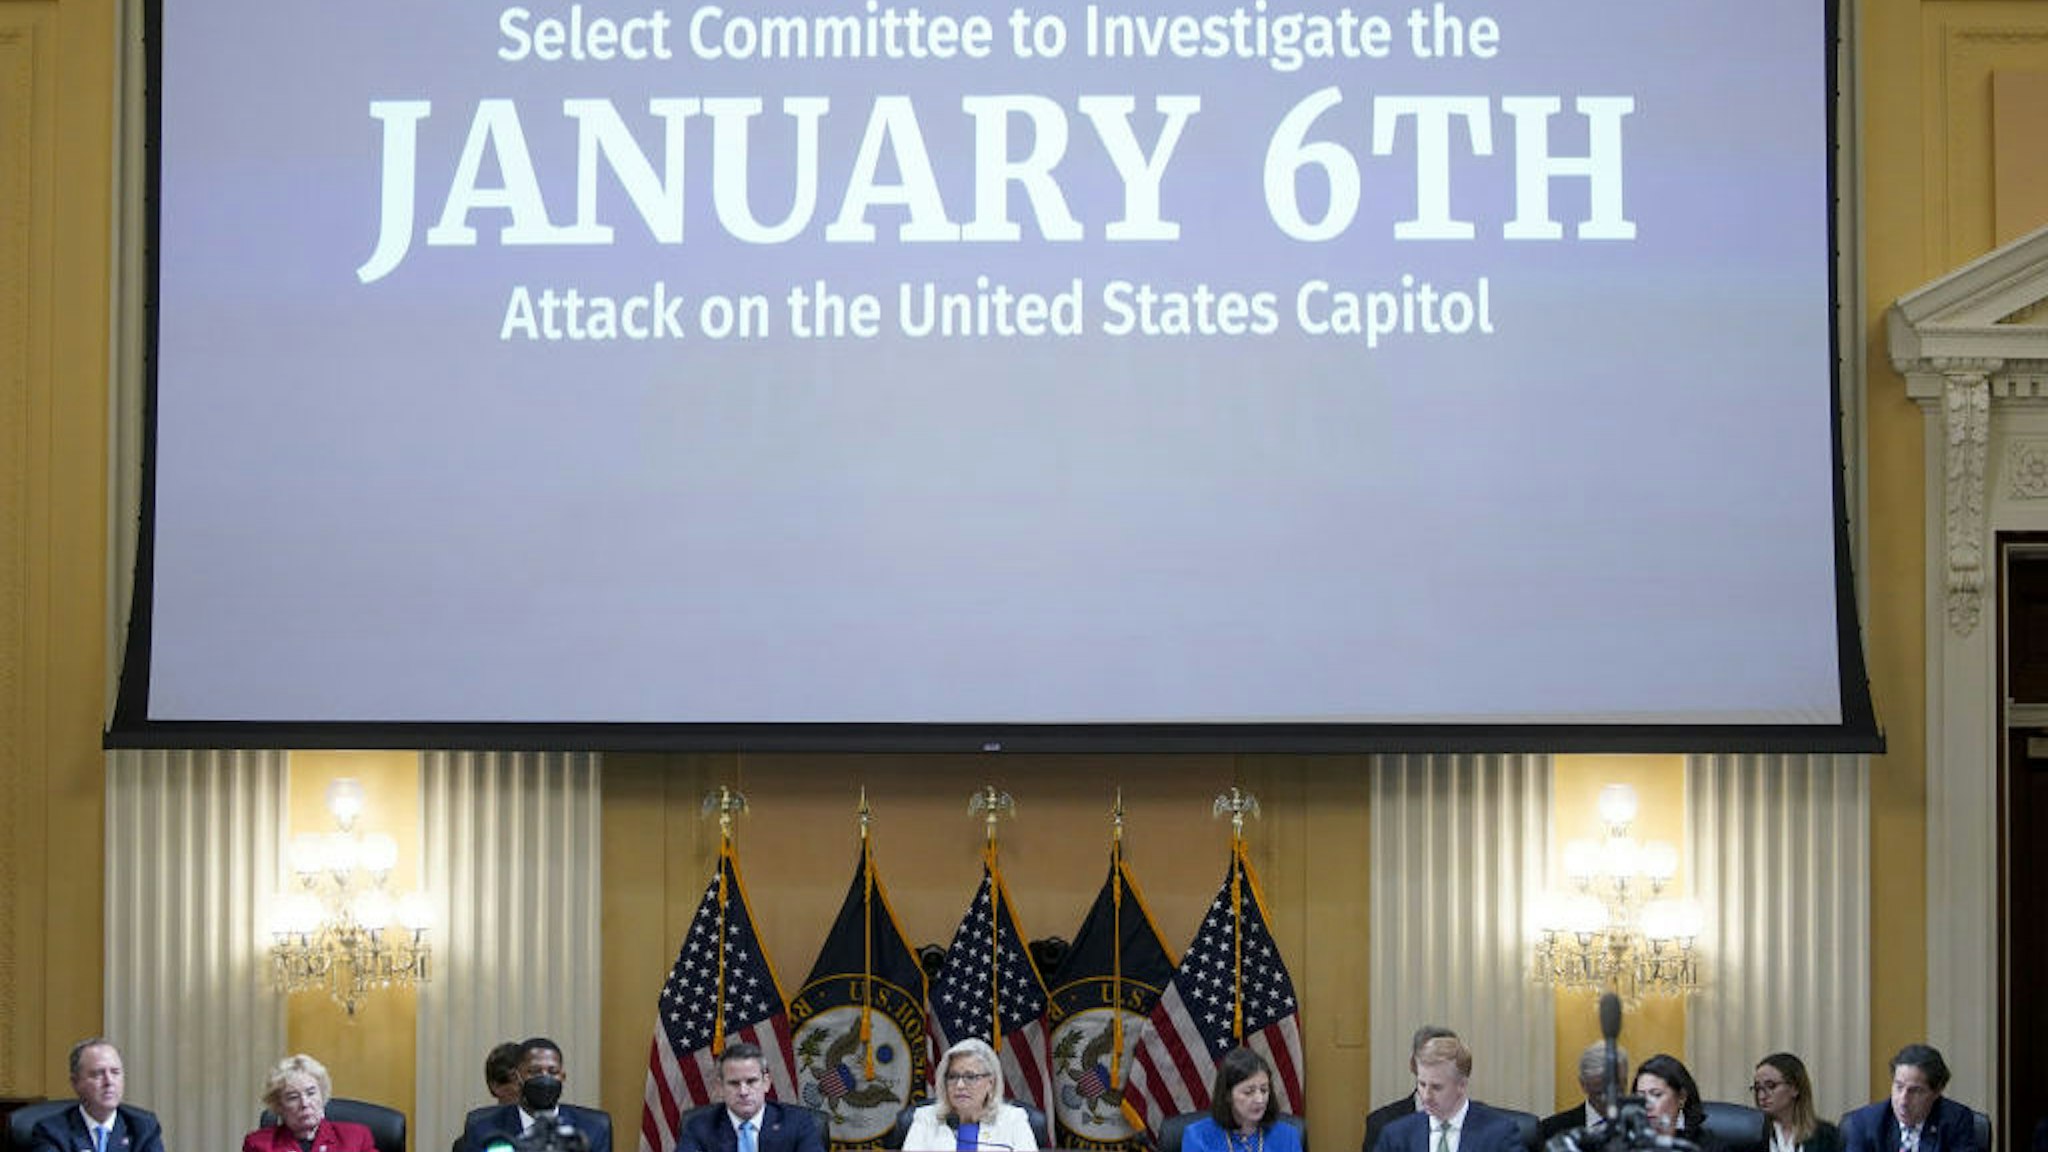 Representative Liz Cheney, a Republican from Wyoming, bottom center, speaks during a hearing of the Select Committee to Investigate the January 6th Attack on the US Capitol in Washington, D.C., US, on Thursday, July 21, 2022. Former President Donald Trump's 187 minutes of inaction as an armed mob attacked the US Capitol will be the focus of the second prime-time hearing by the House committee investigating the Jan. 6, 2021 insurrection. Photographer: Al Drago/Bloomberg